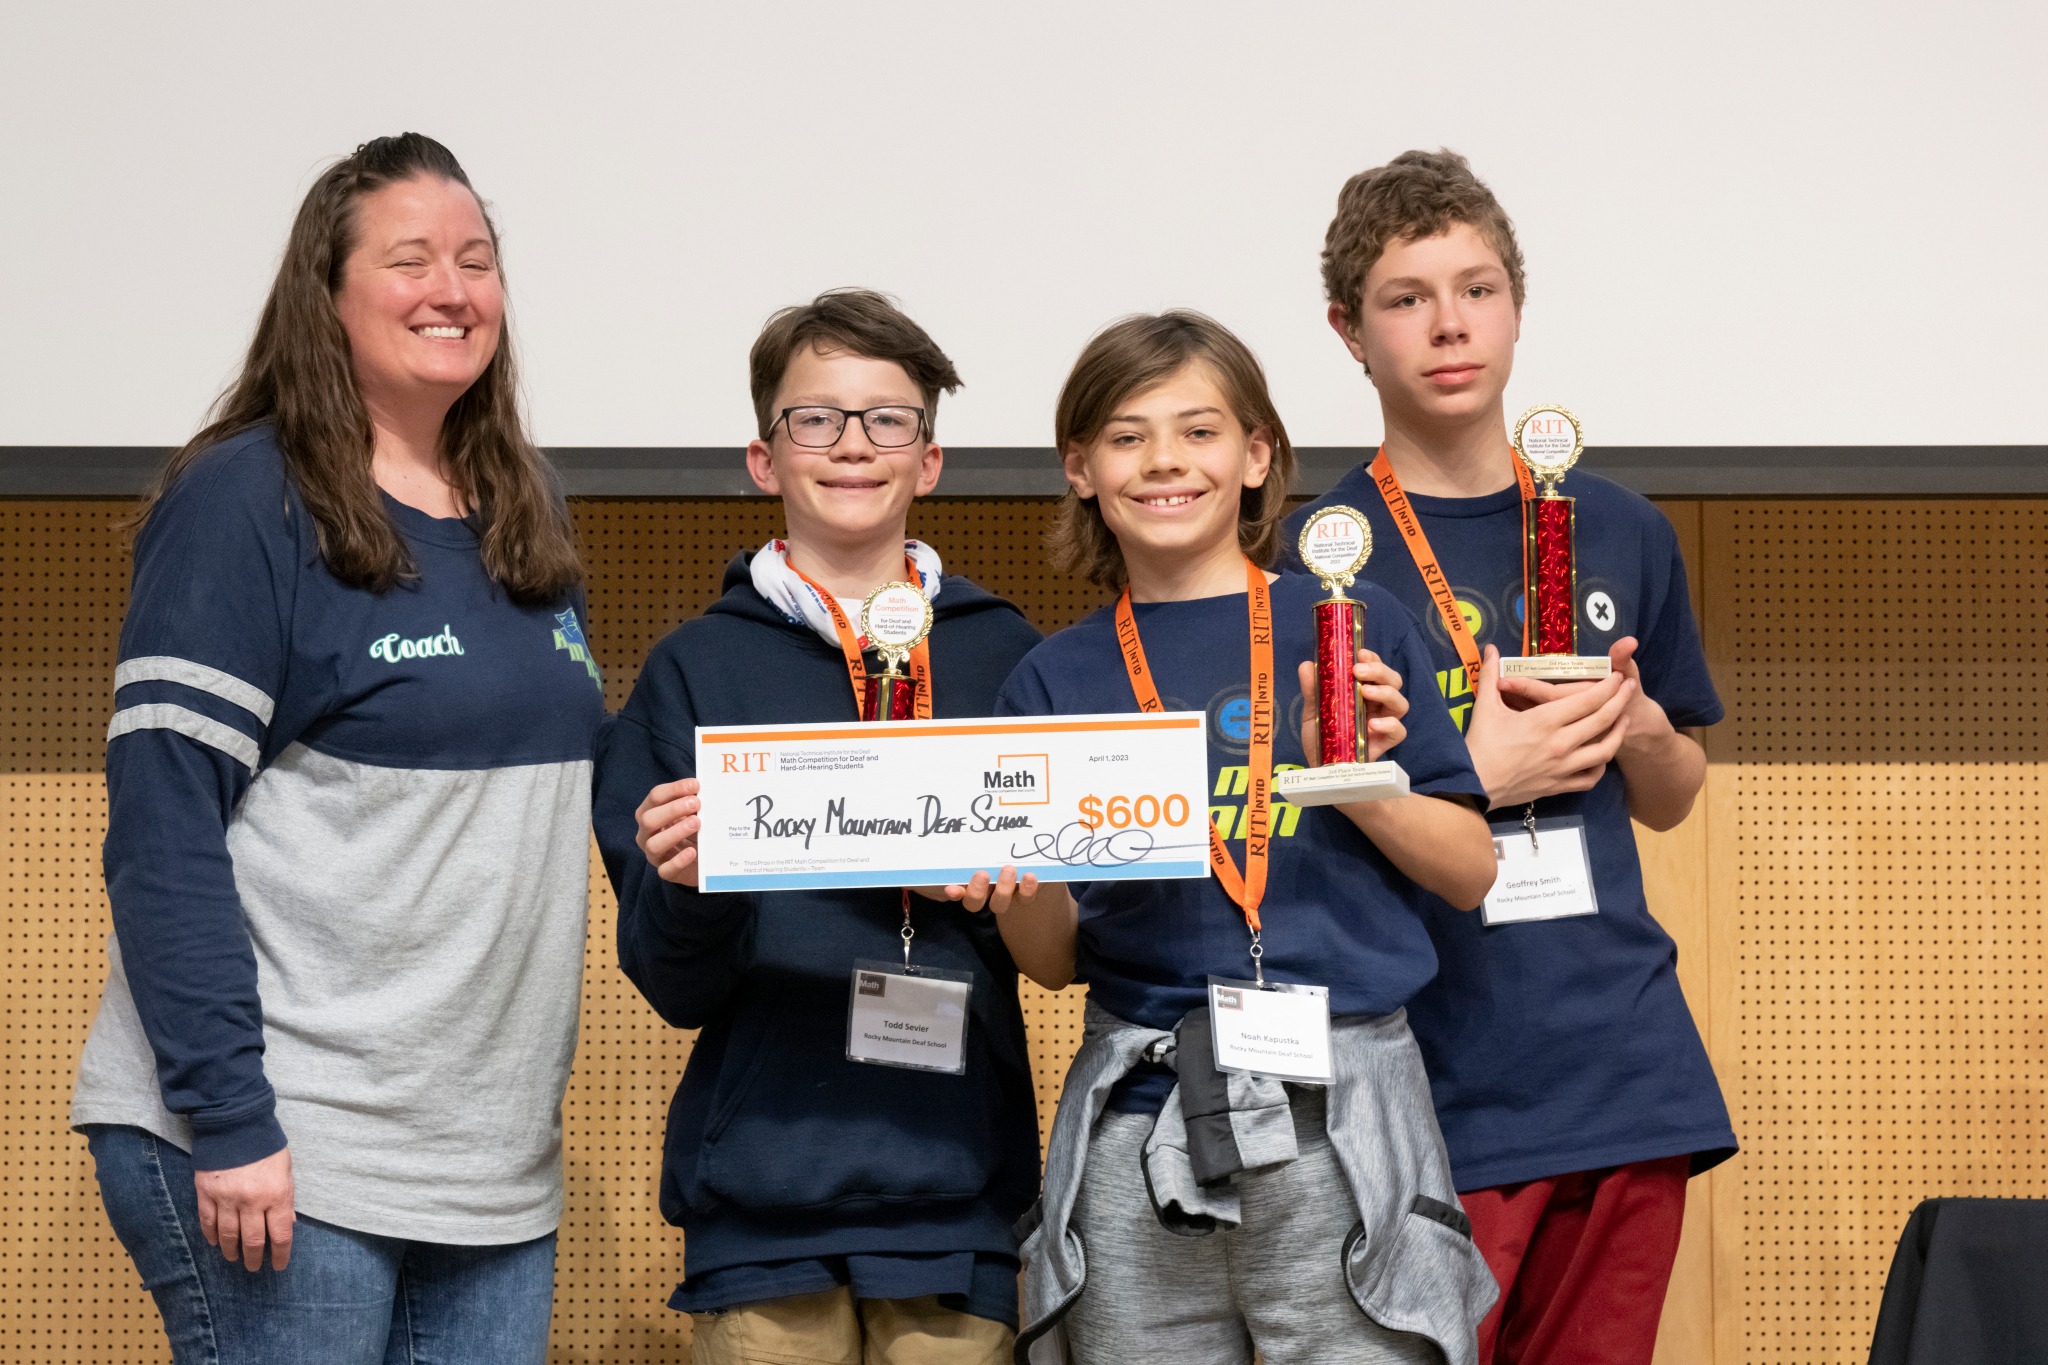 The image shows Rocky Mountain Deaf School contestants and their coach in blue and grey t shirts, standing in line, facing the camera and holding up trophies and a check for $600. Contestants are wearing orange name tags. 